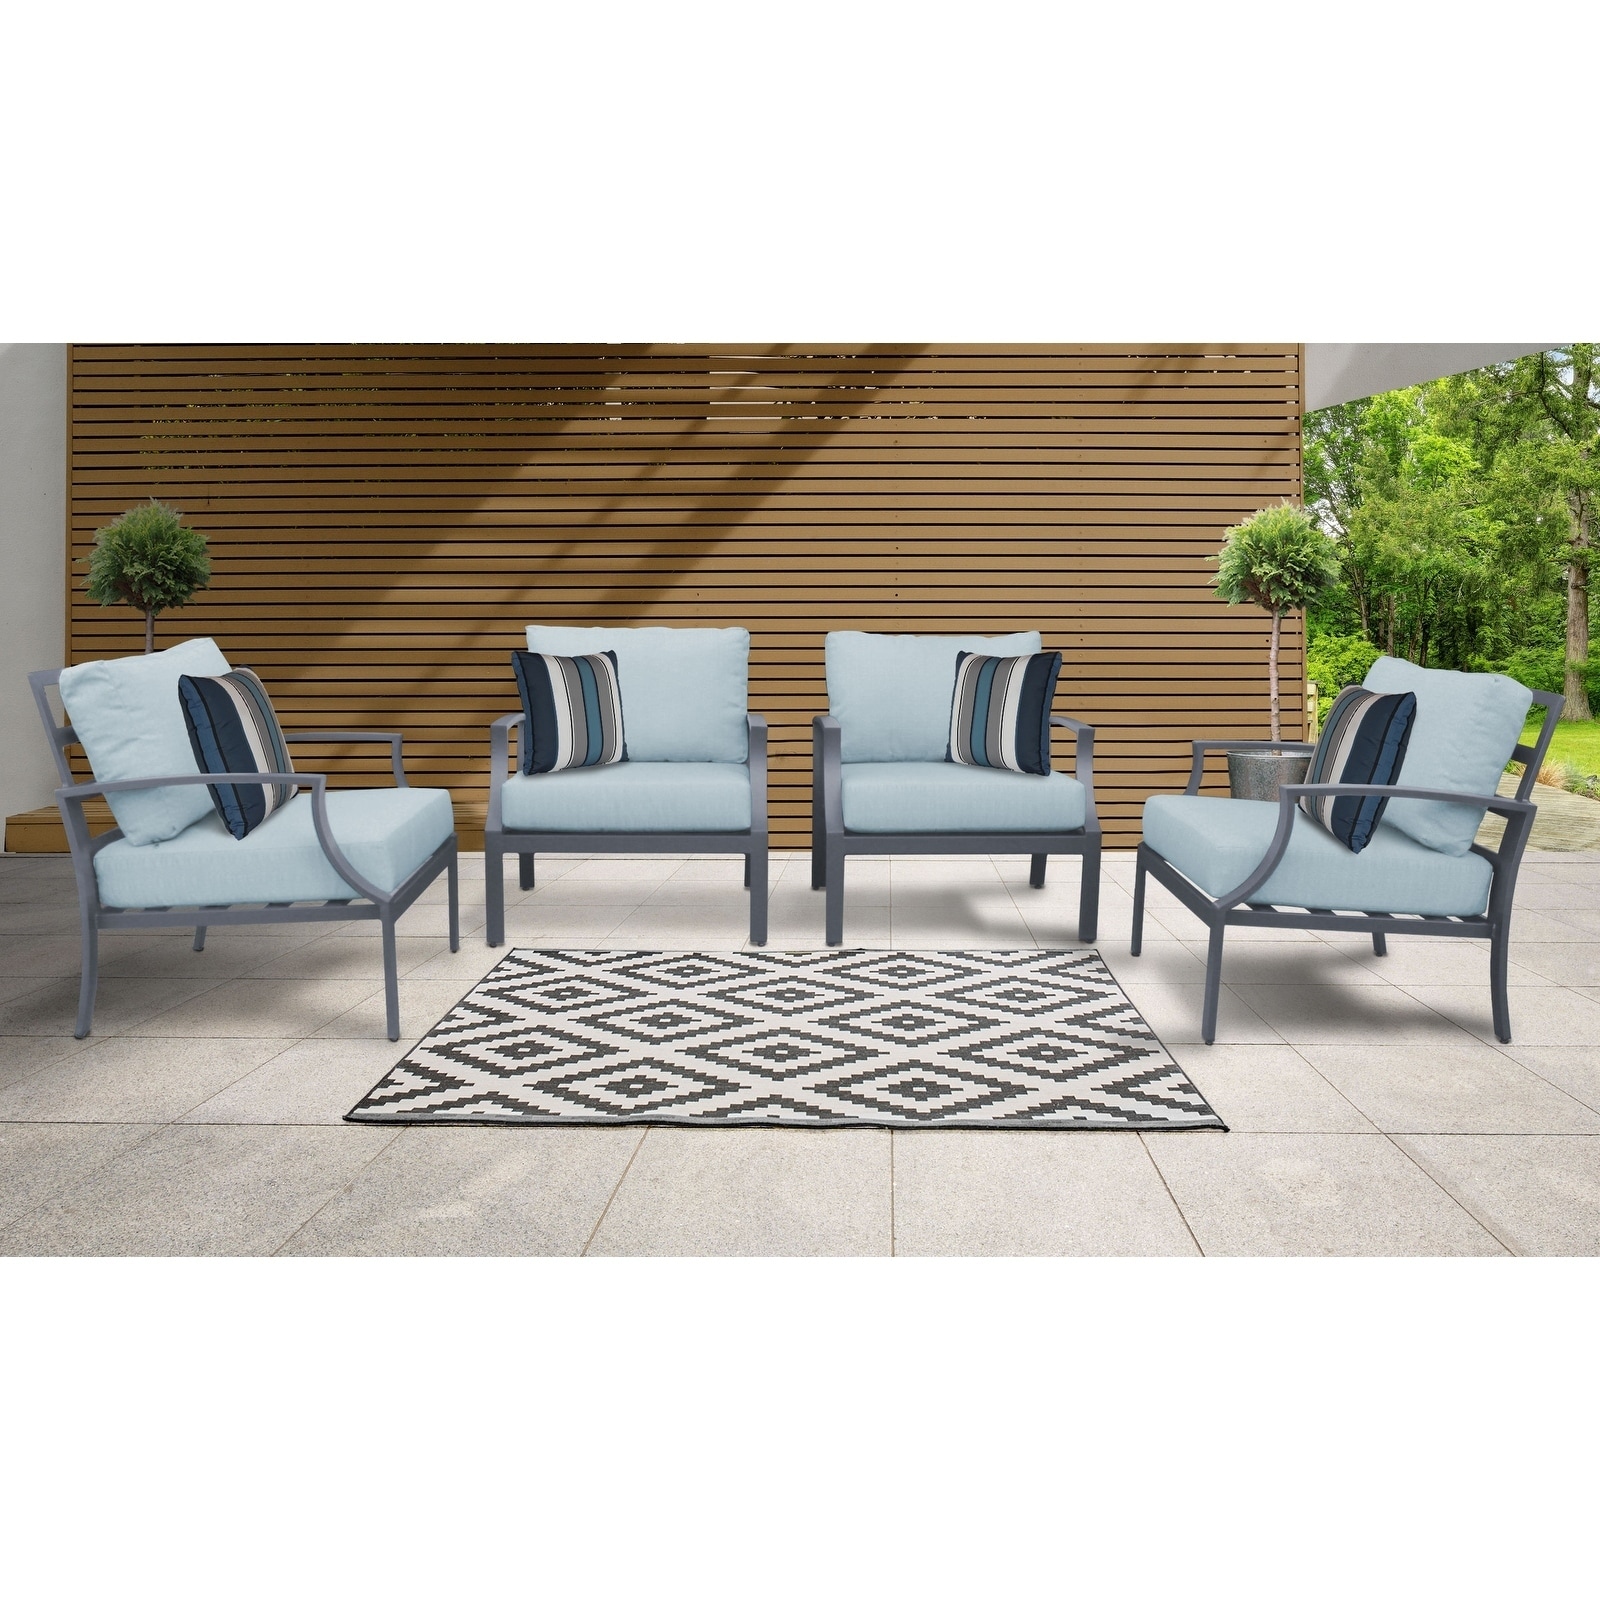 Moresby 4-piece Outdoor Aluminum Patio Furniture Set 04g By Havenside Home